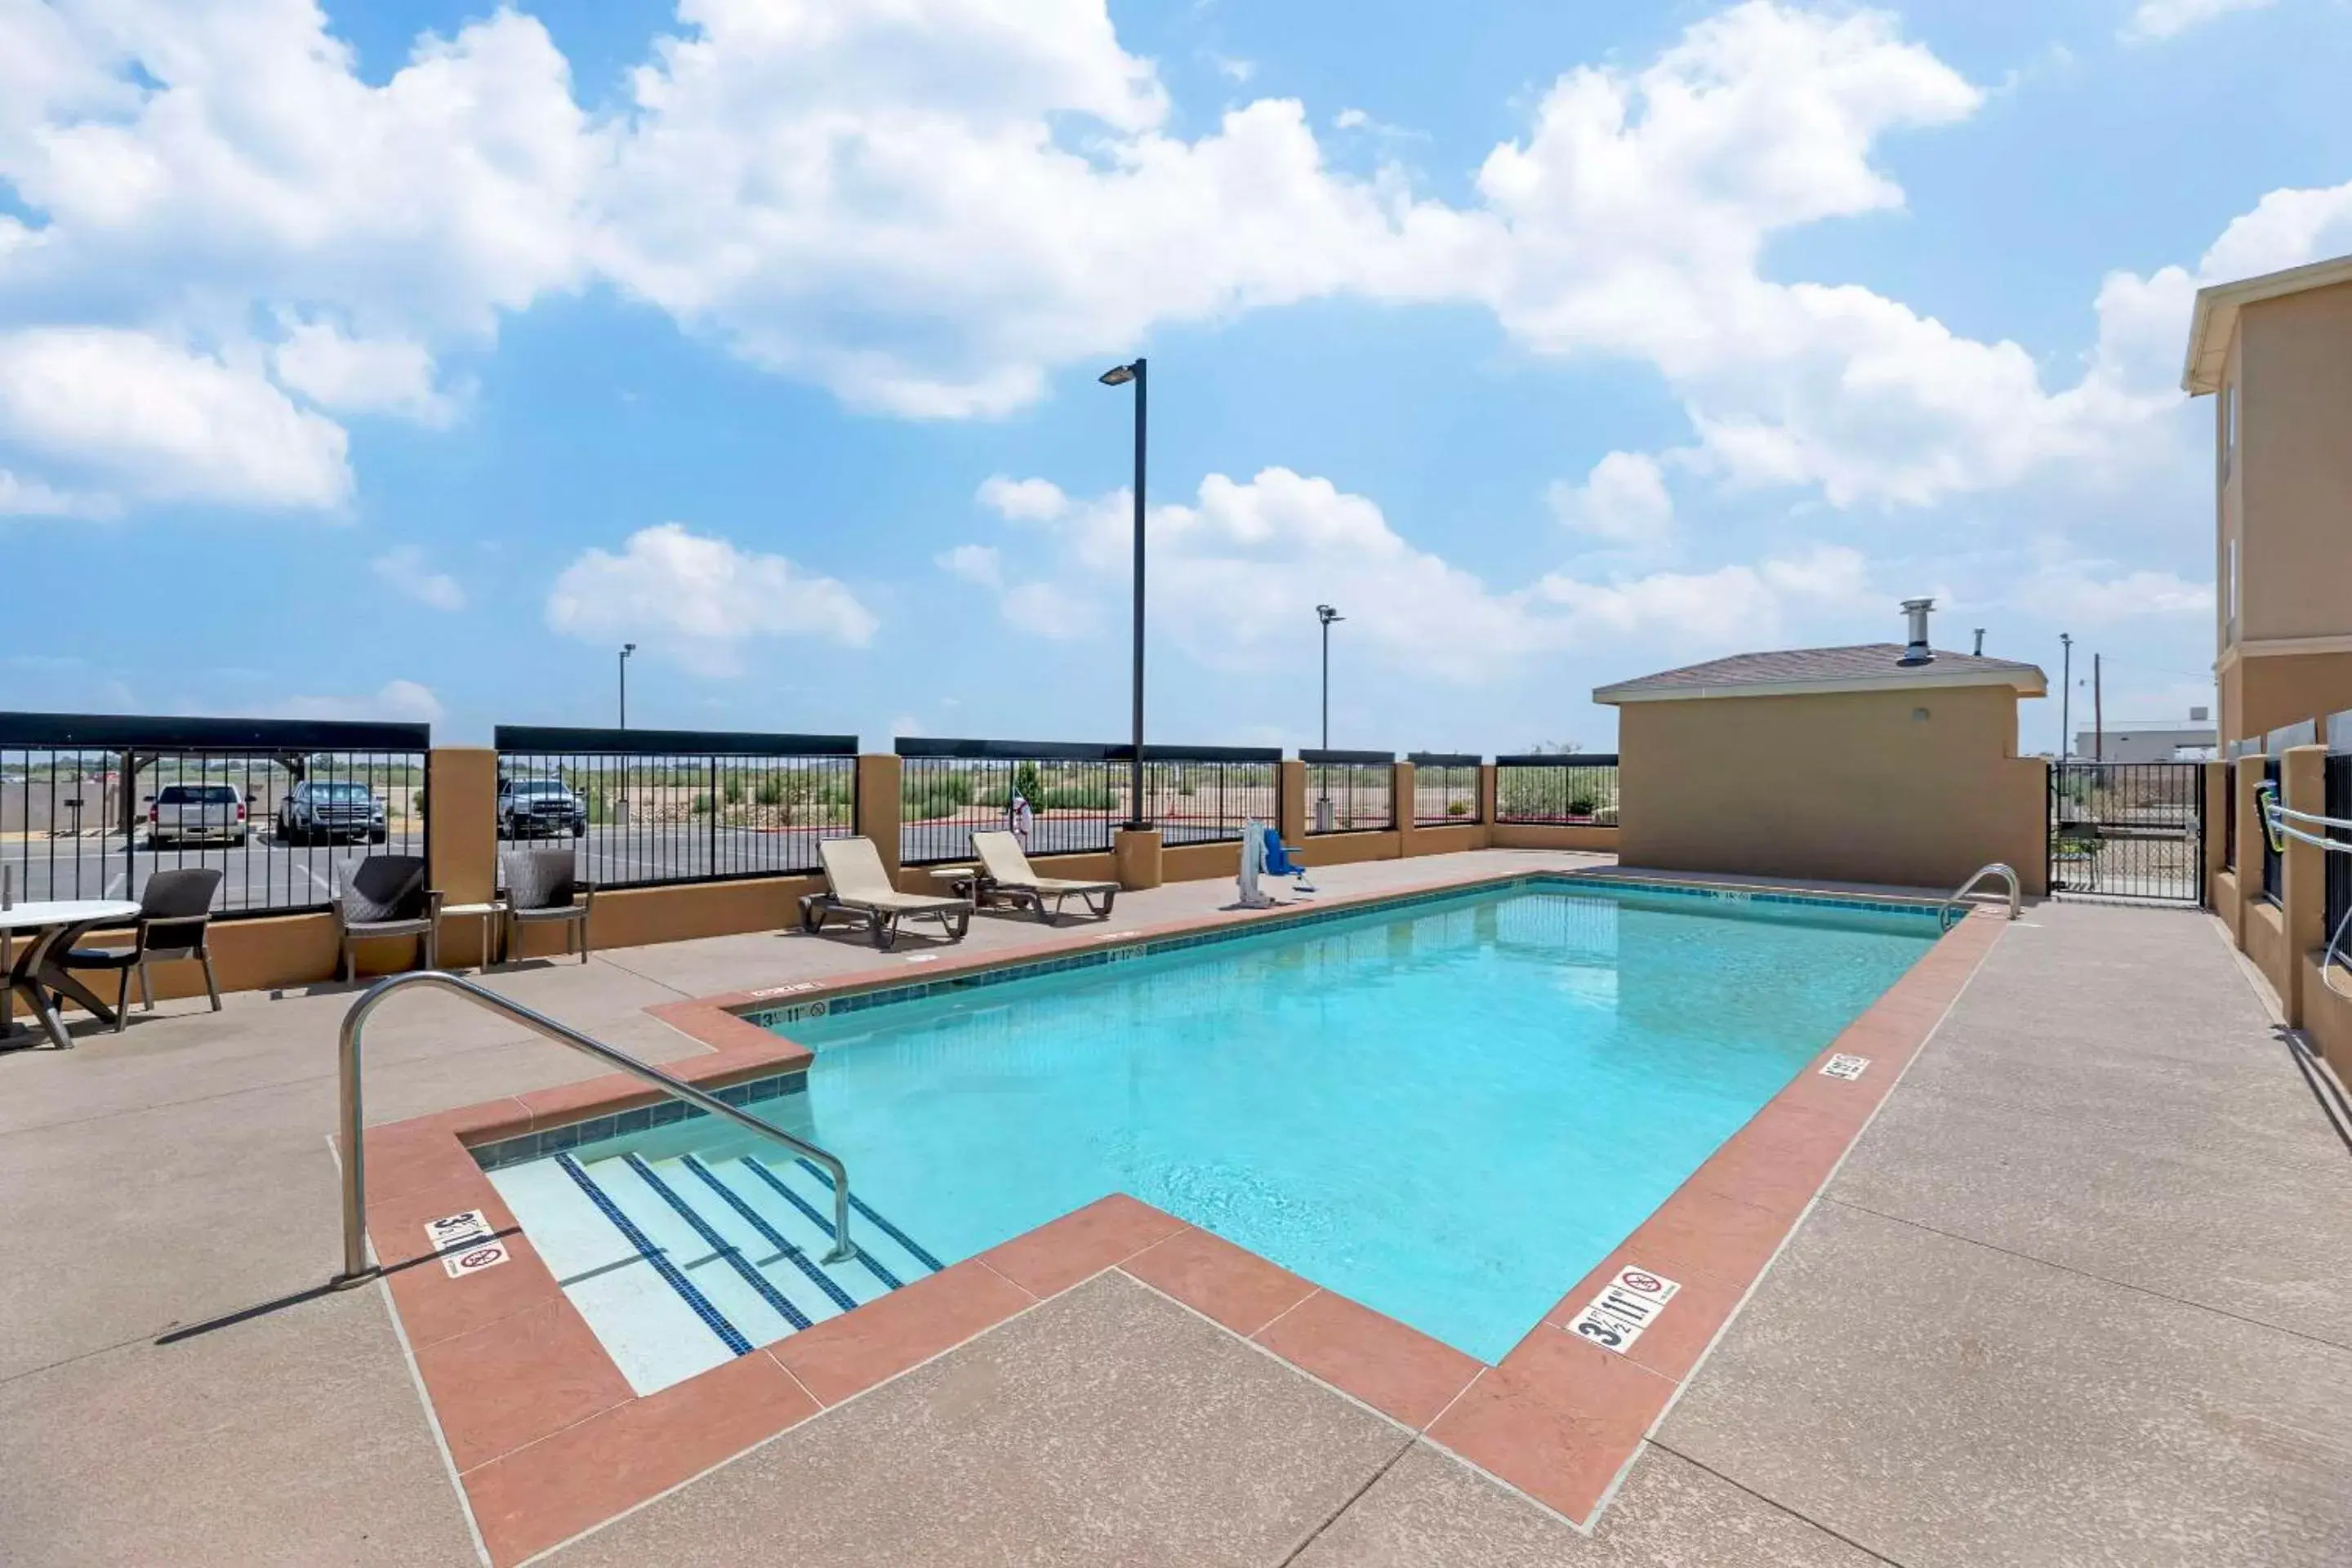 Swimming Pool in Quality Inn & Suites Carlsbad Caverns Area